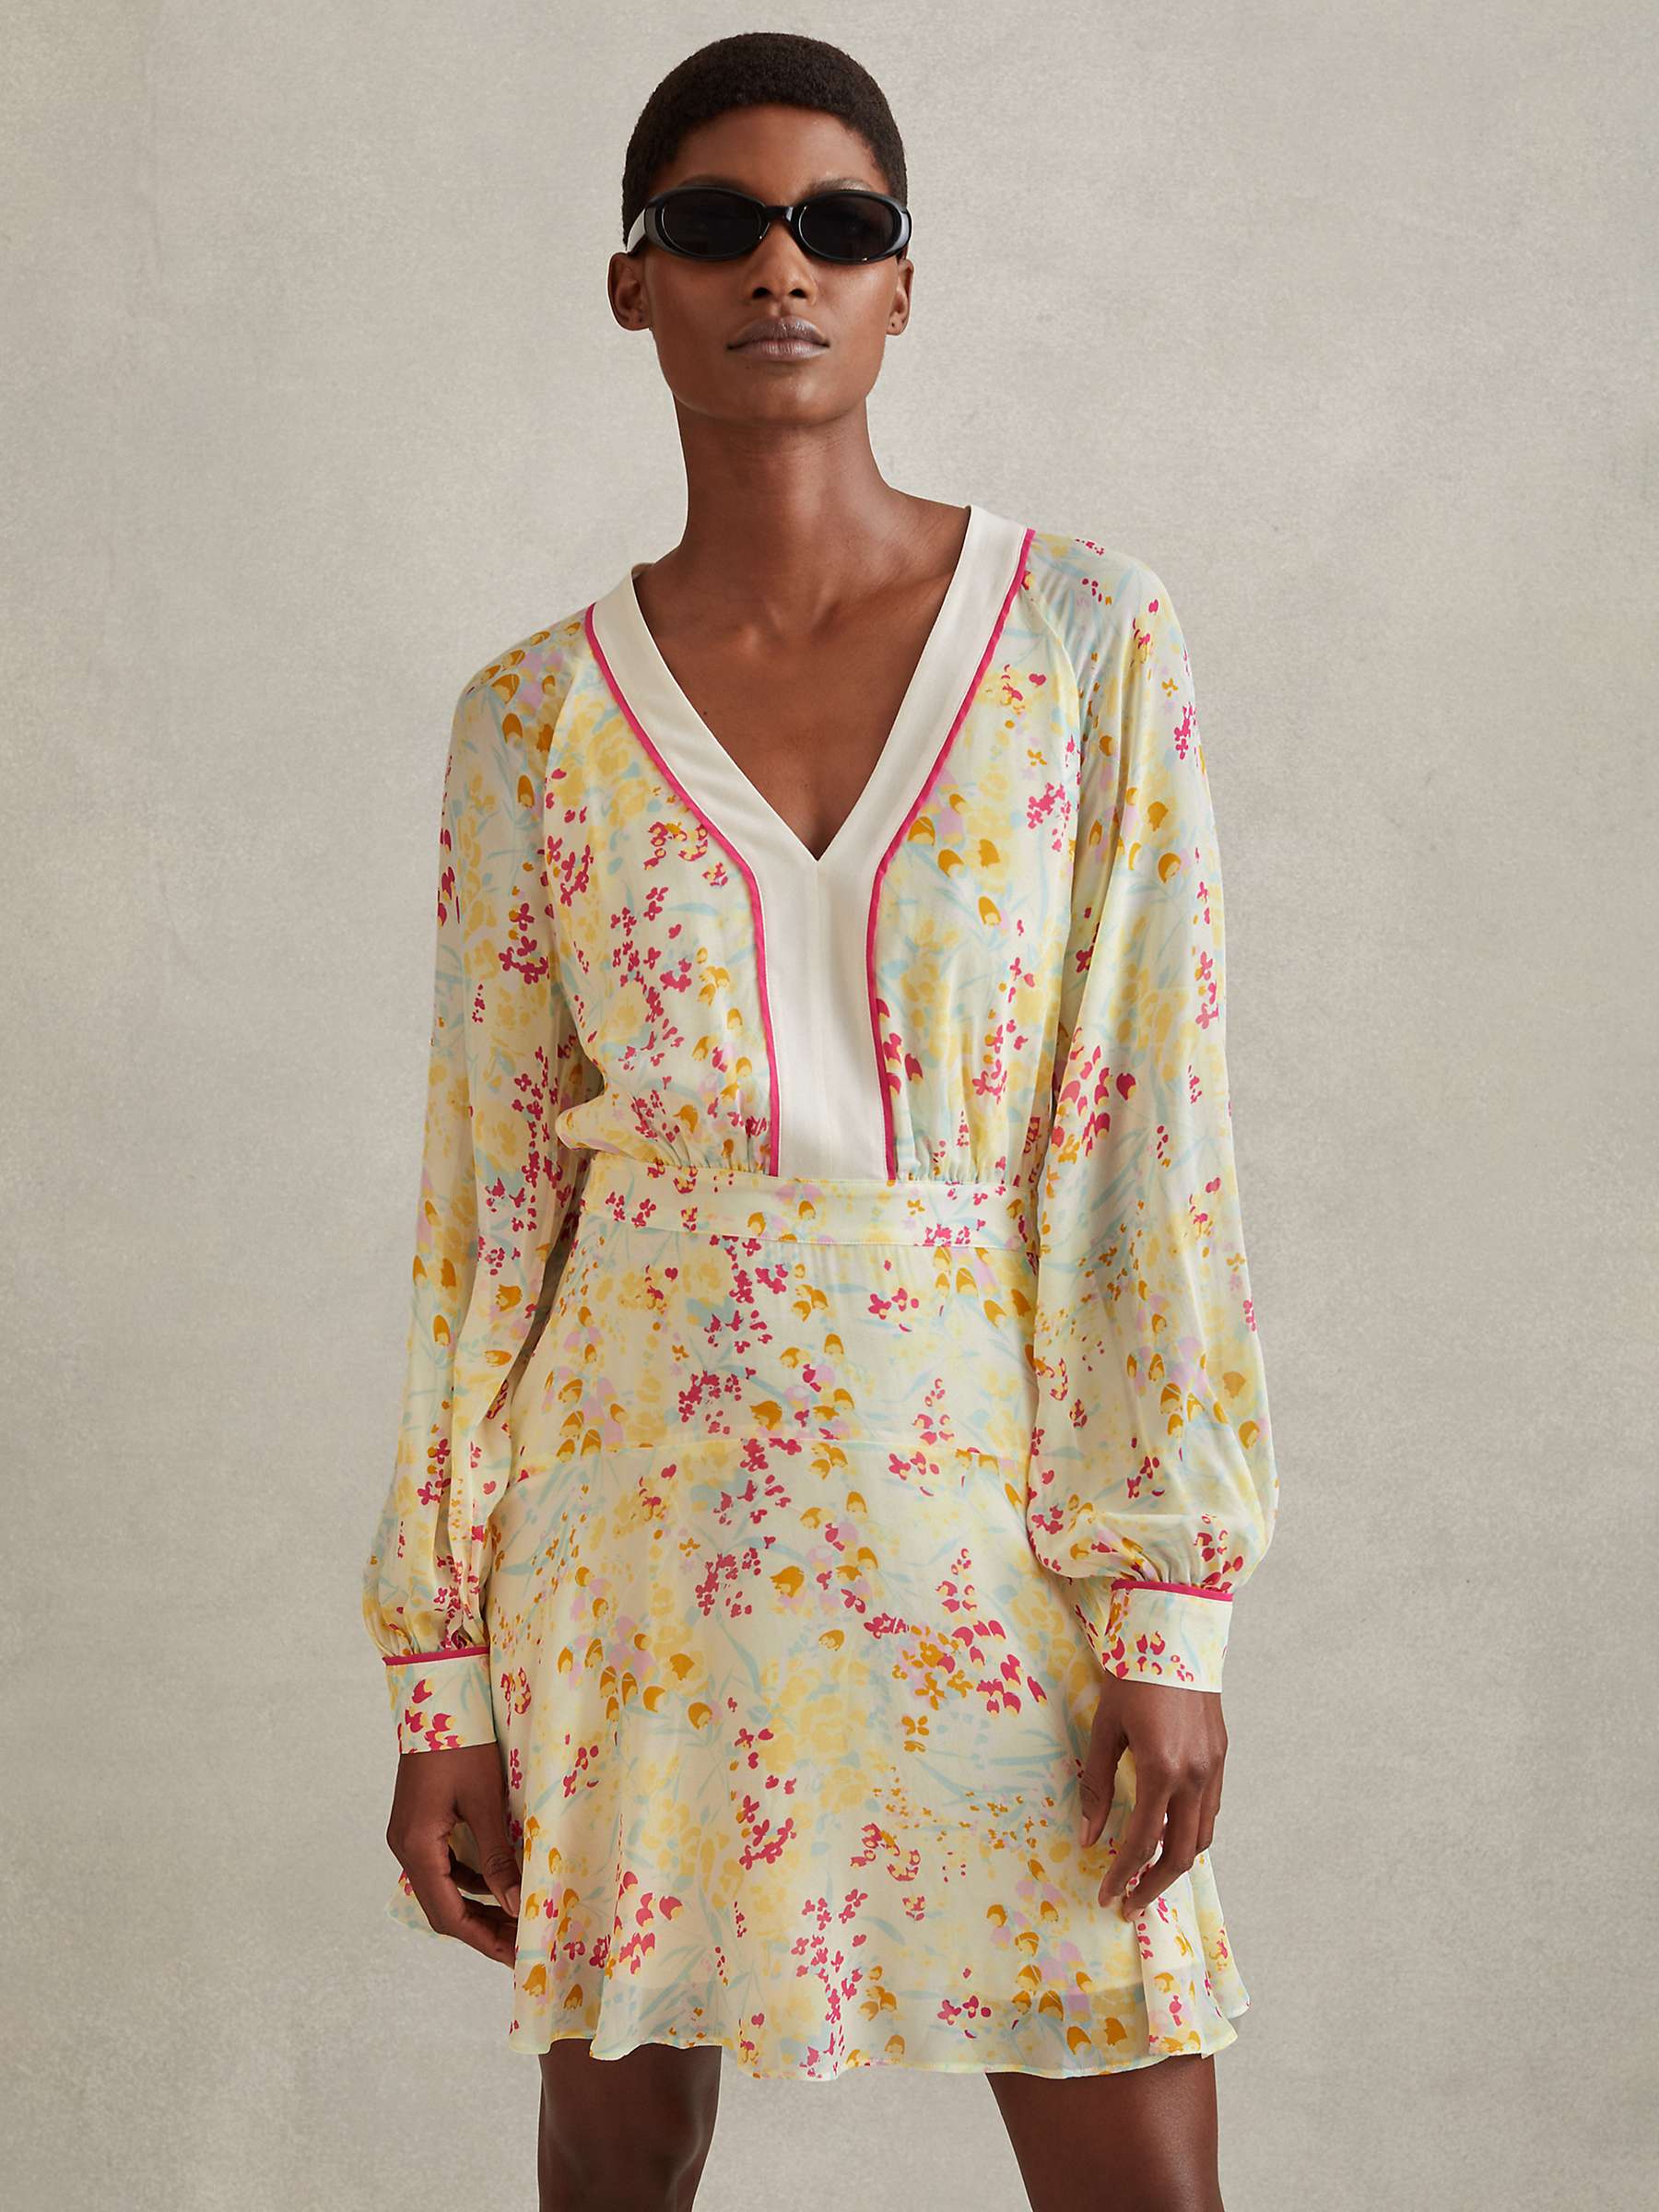 Buy Reiss Molly Floral Print Mini Dress, Yellow/Multi Online at johnlewis.com